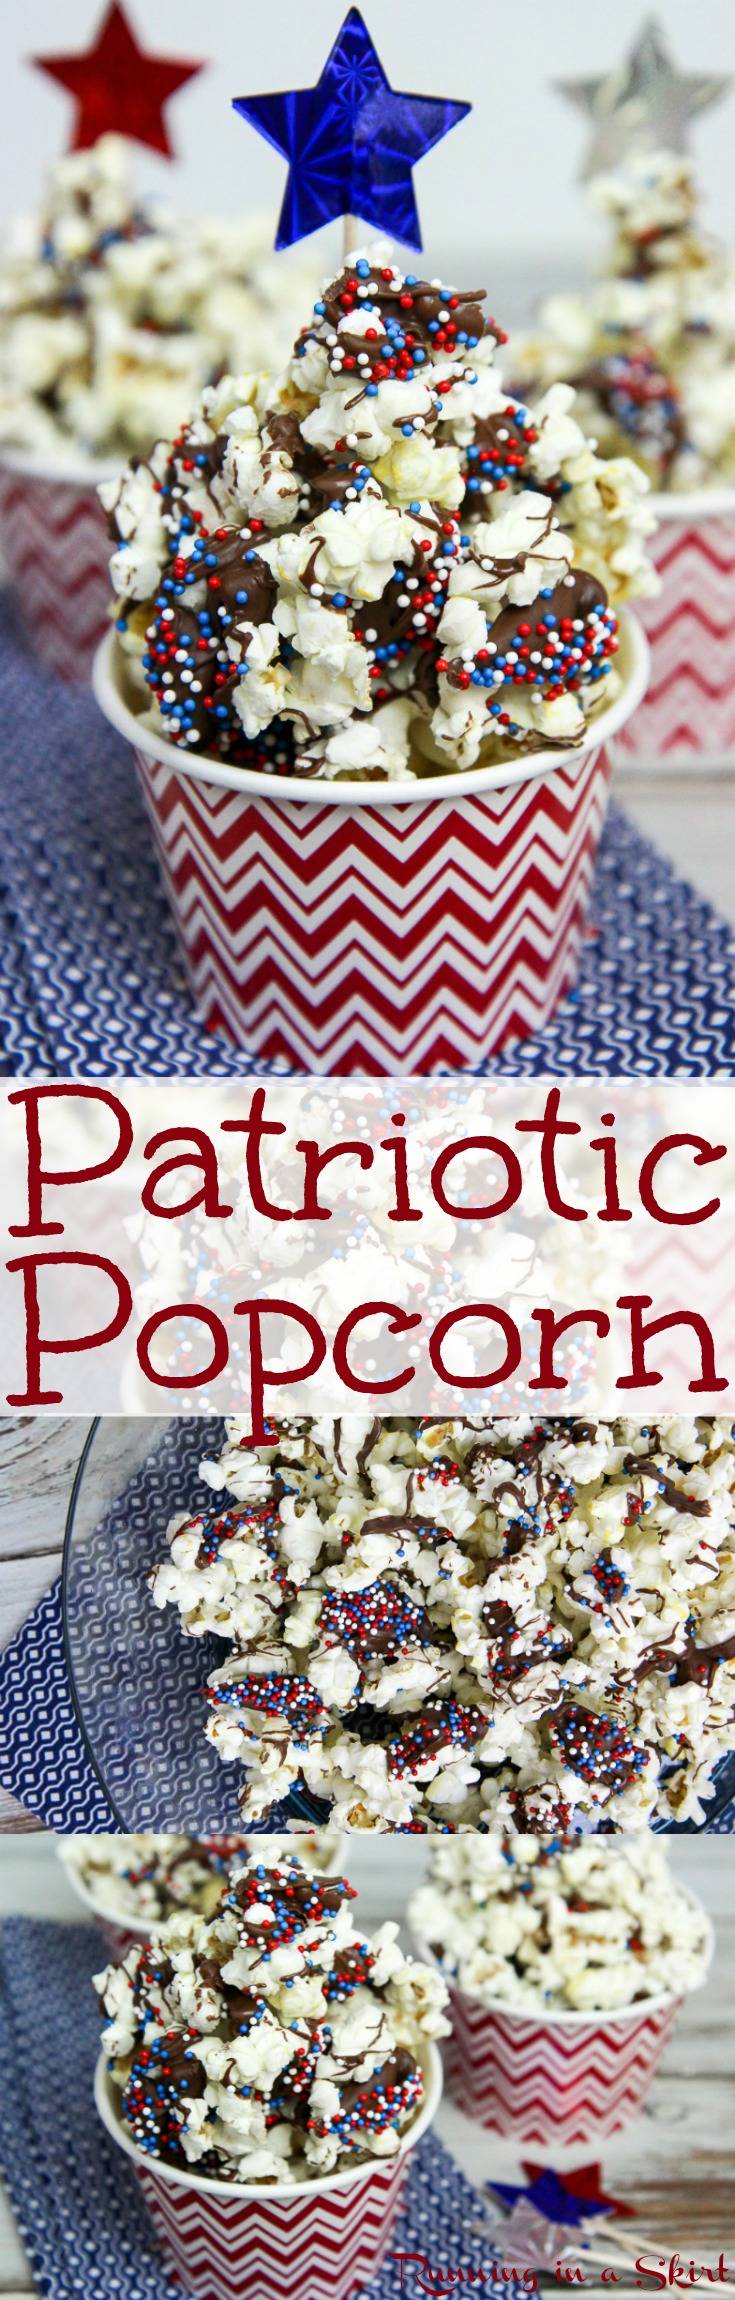 3 Ingredient Dark Chocolate Patriotic Popcorn recipe. A fun red, white and blue food idea for 4th of July. The perfect semi healthy holiday treat. Easy DIY make ahead for kids or for a crowd. Simple, inexpensive, creative and cute for movie night or an edible gift! / Running in a Skirt via @juliewunder